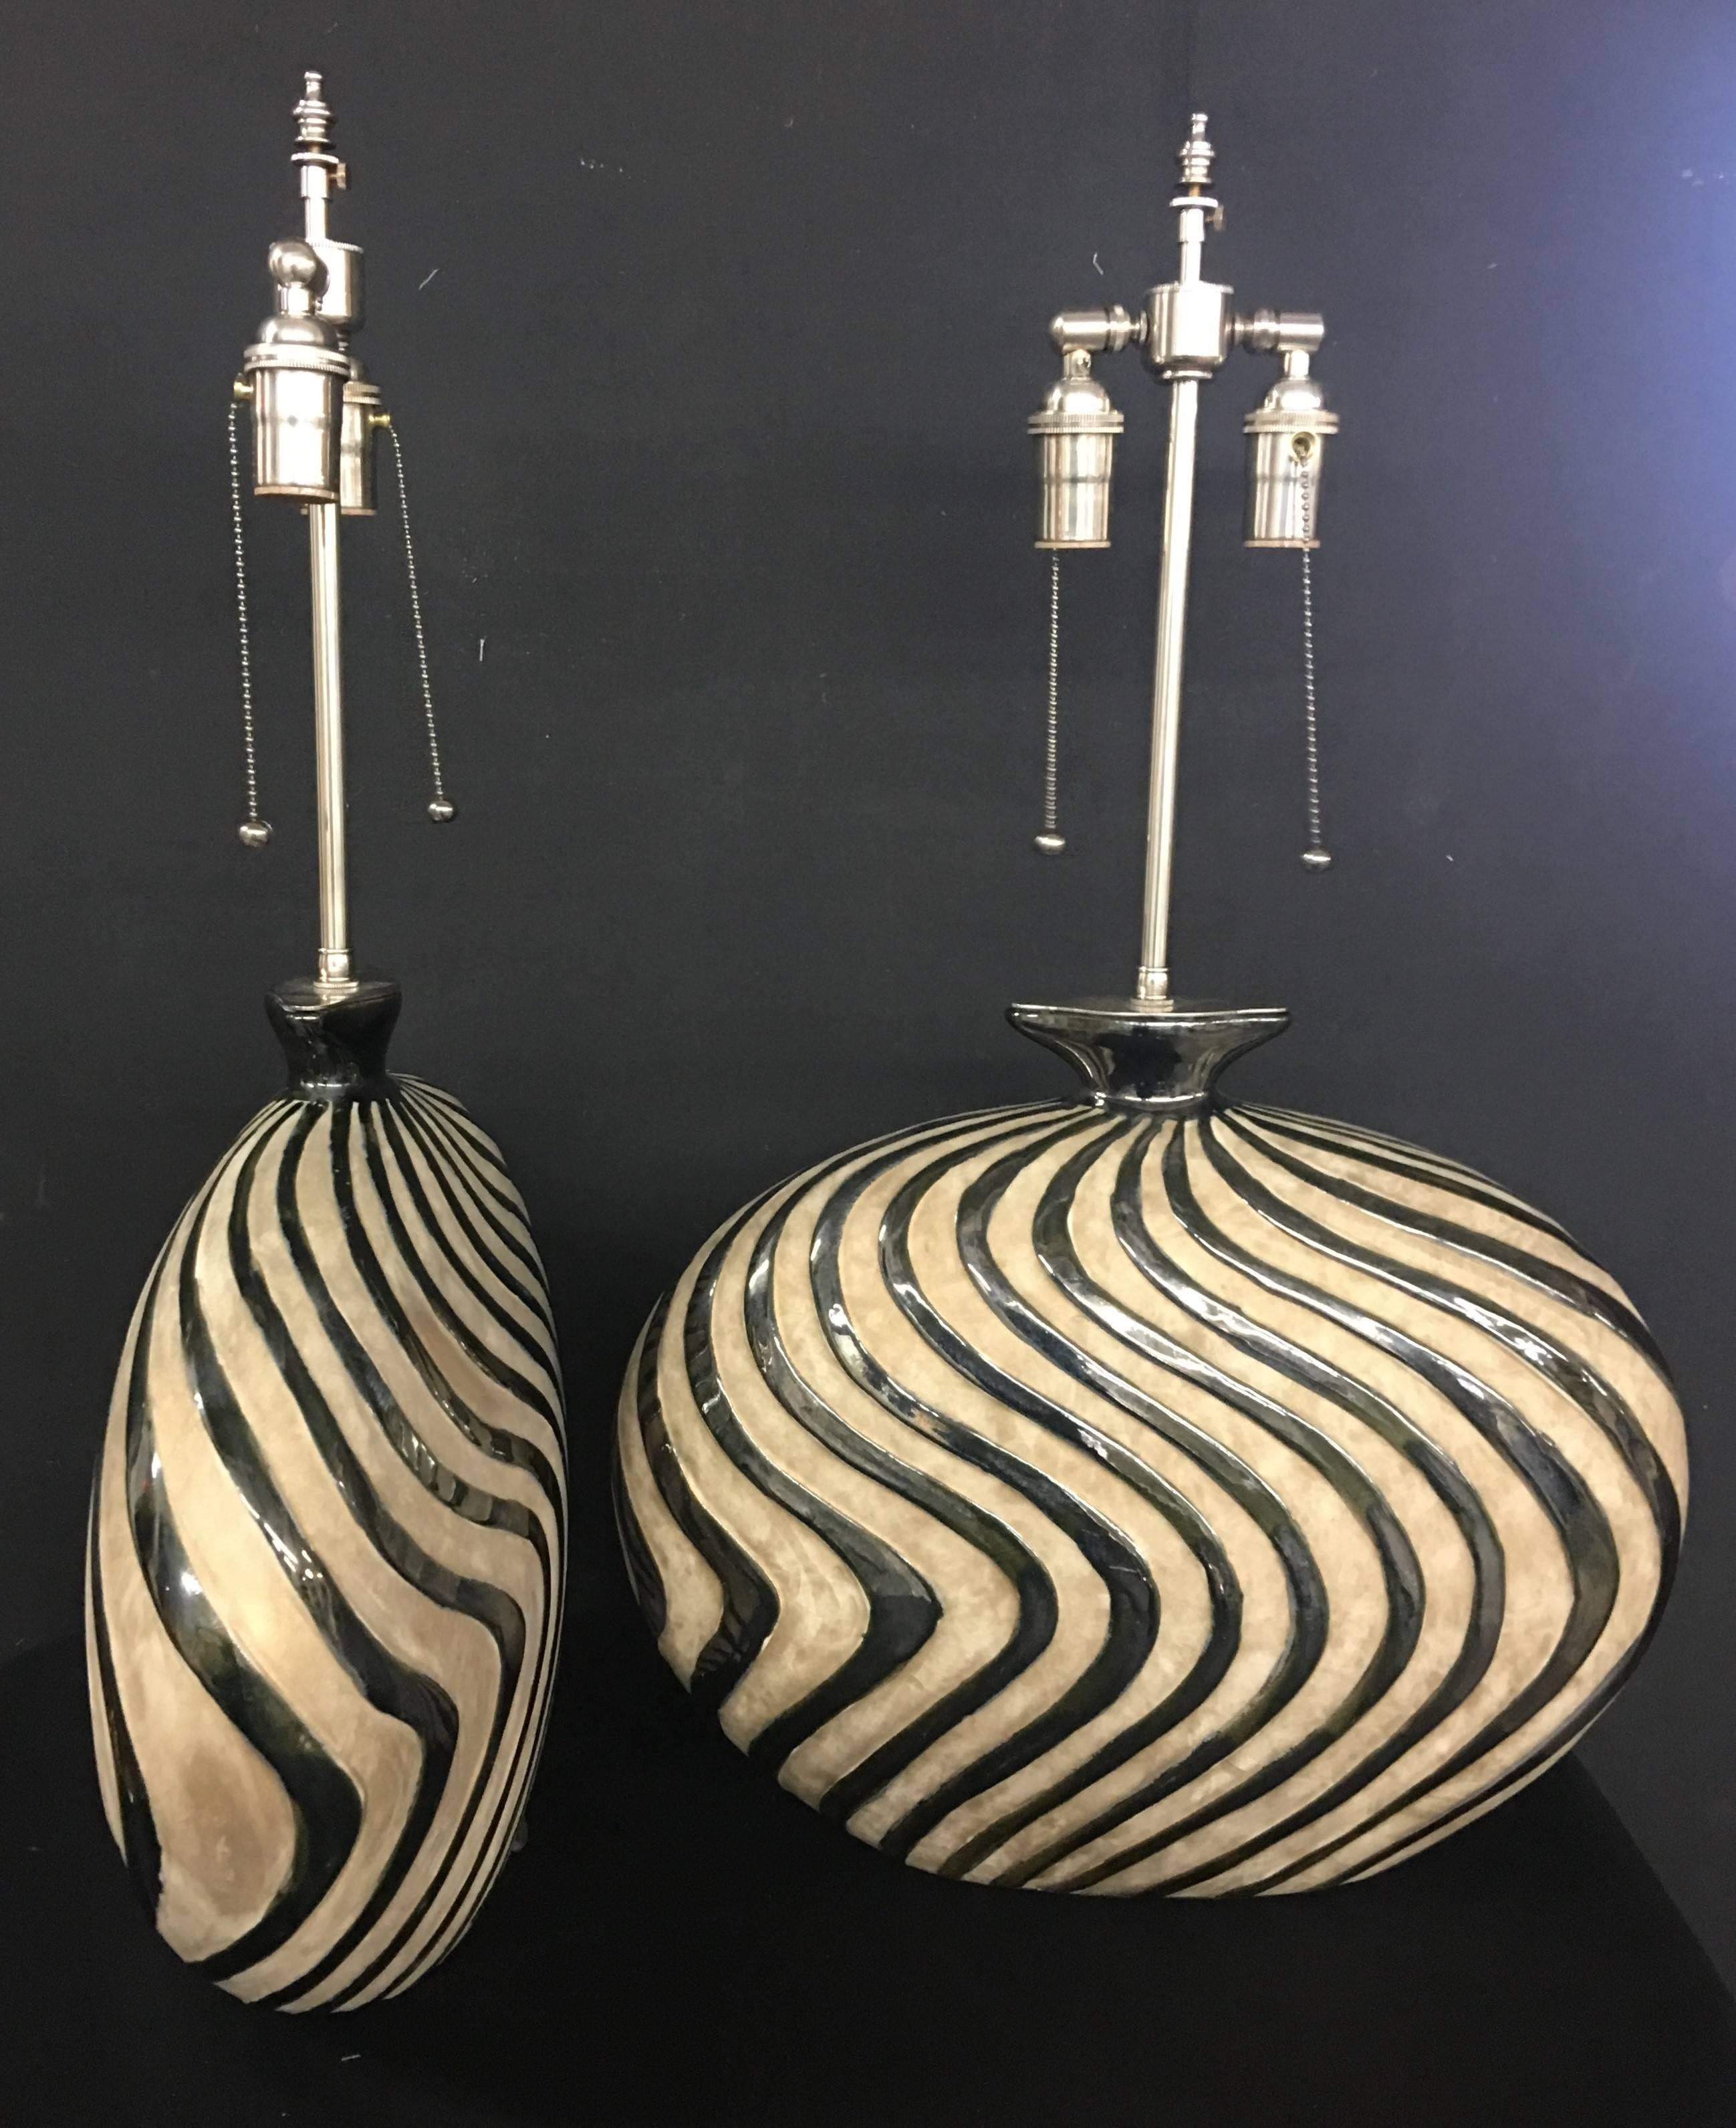 Unusual pair of whimsical ceramic vessels with lamp application. The vessels are in a mottled cream background with raised silver glazed waves. The hardware is polished nickel. The vessels are 15.5